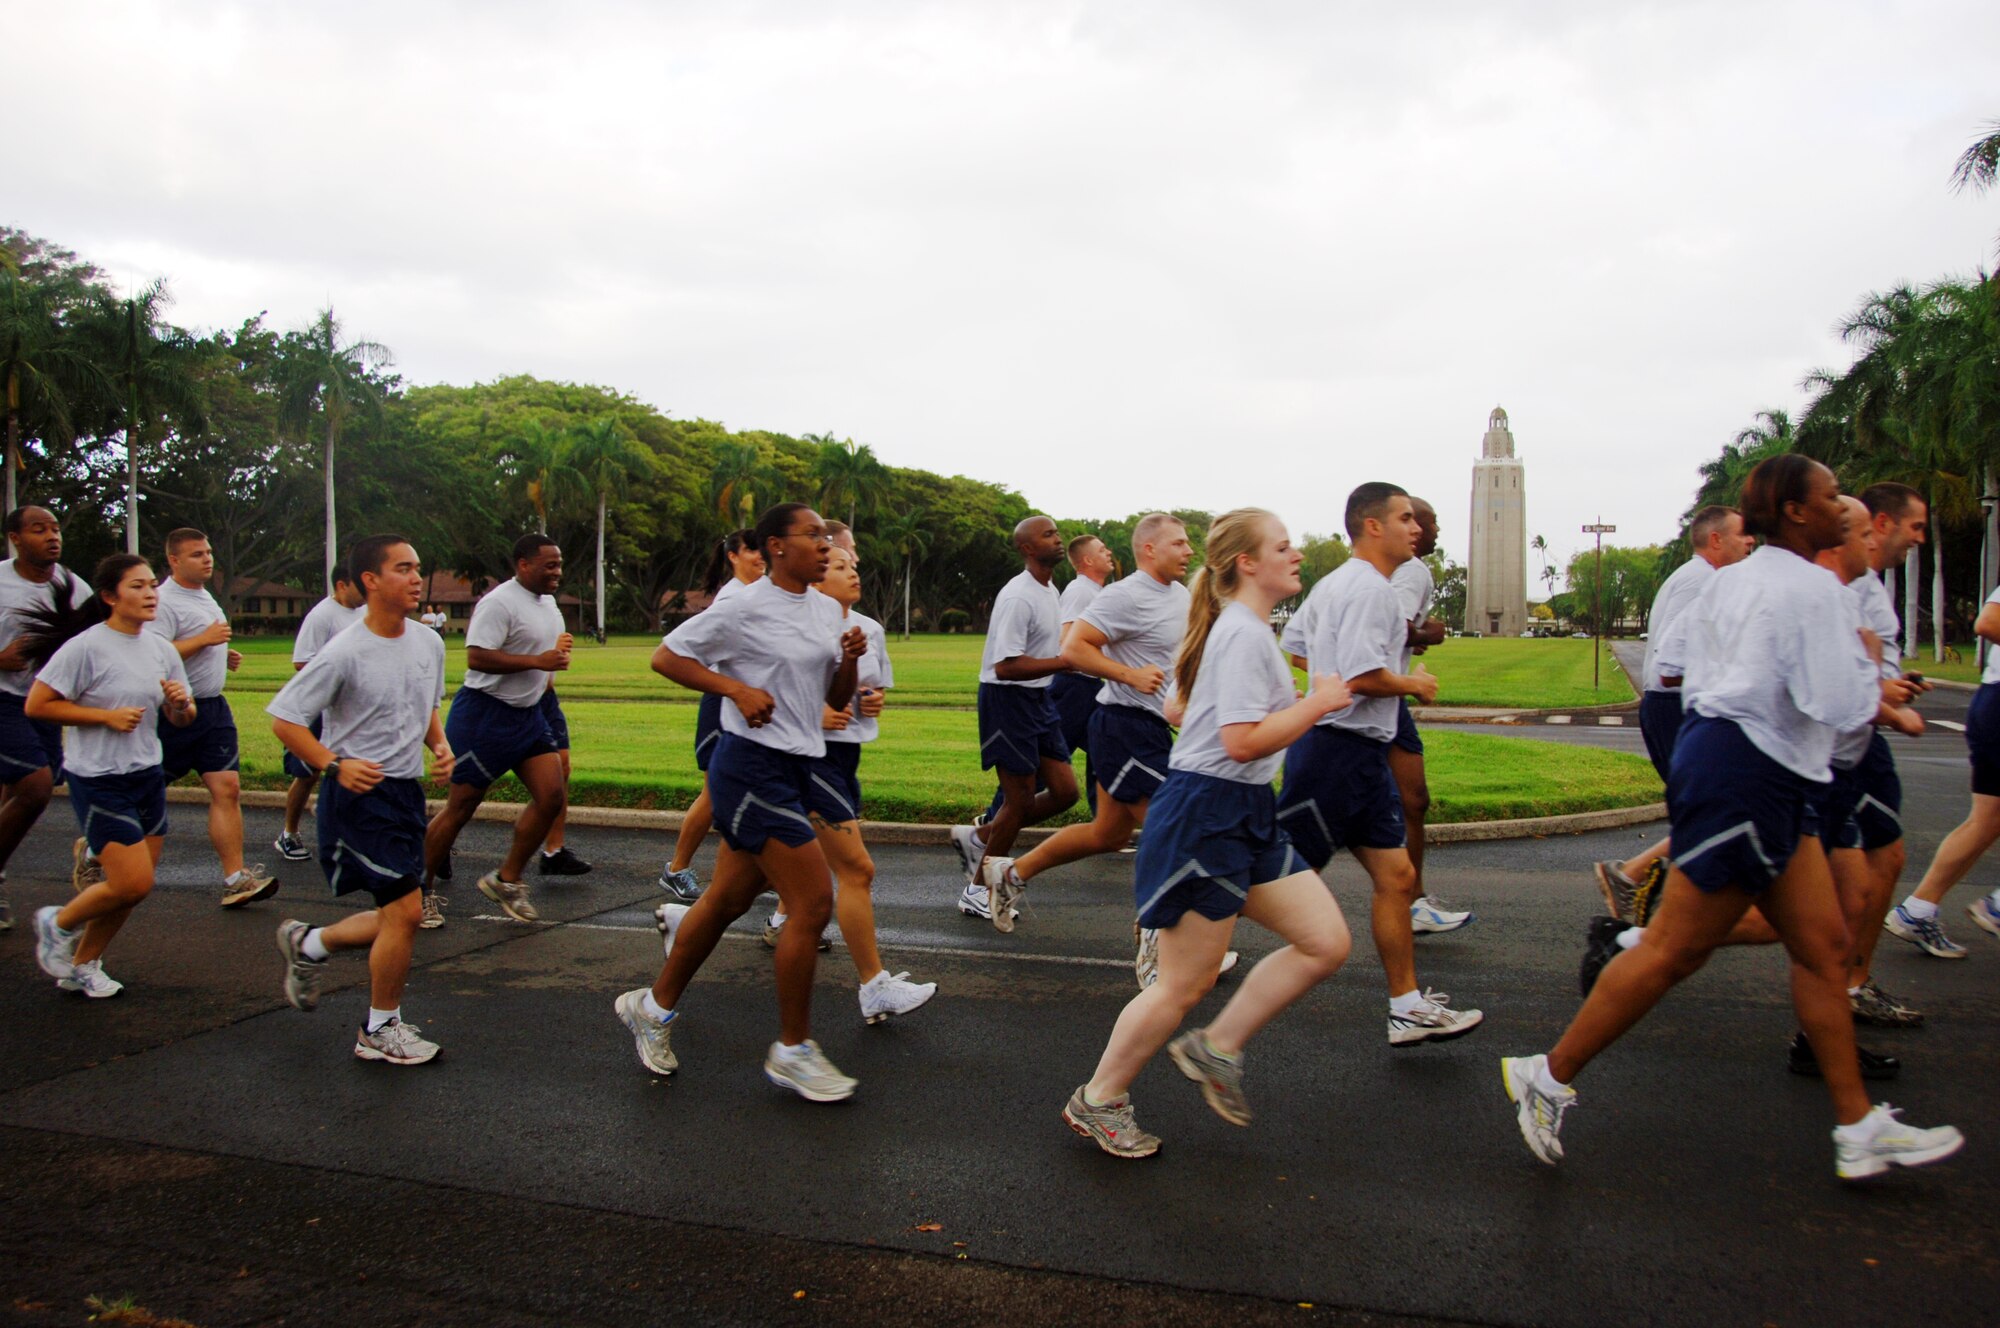 Airmen run past Freedom  Mall at the "Warrior Run" May 7 at Joint Base Pearl Harbor Hickam, Hi. Participants were addressed by Col. Giovanni Tuck, 15th Airlift Wing Commander before beginning the run - Col. Tuck's last as 15th AW commander. (U.S. Air Force photo by Senior Airman Nathan Allen)